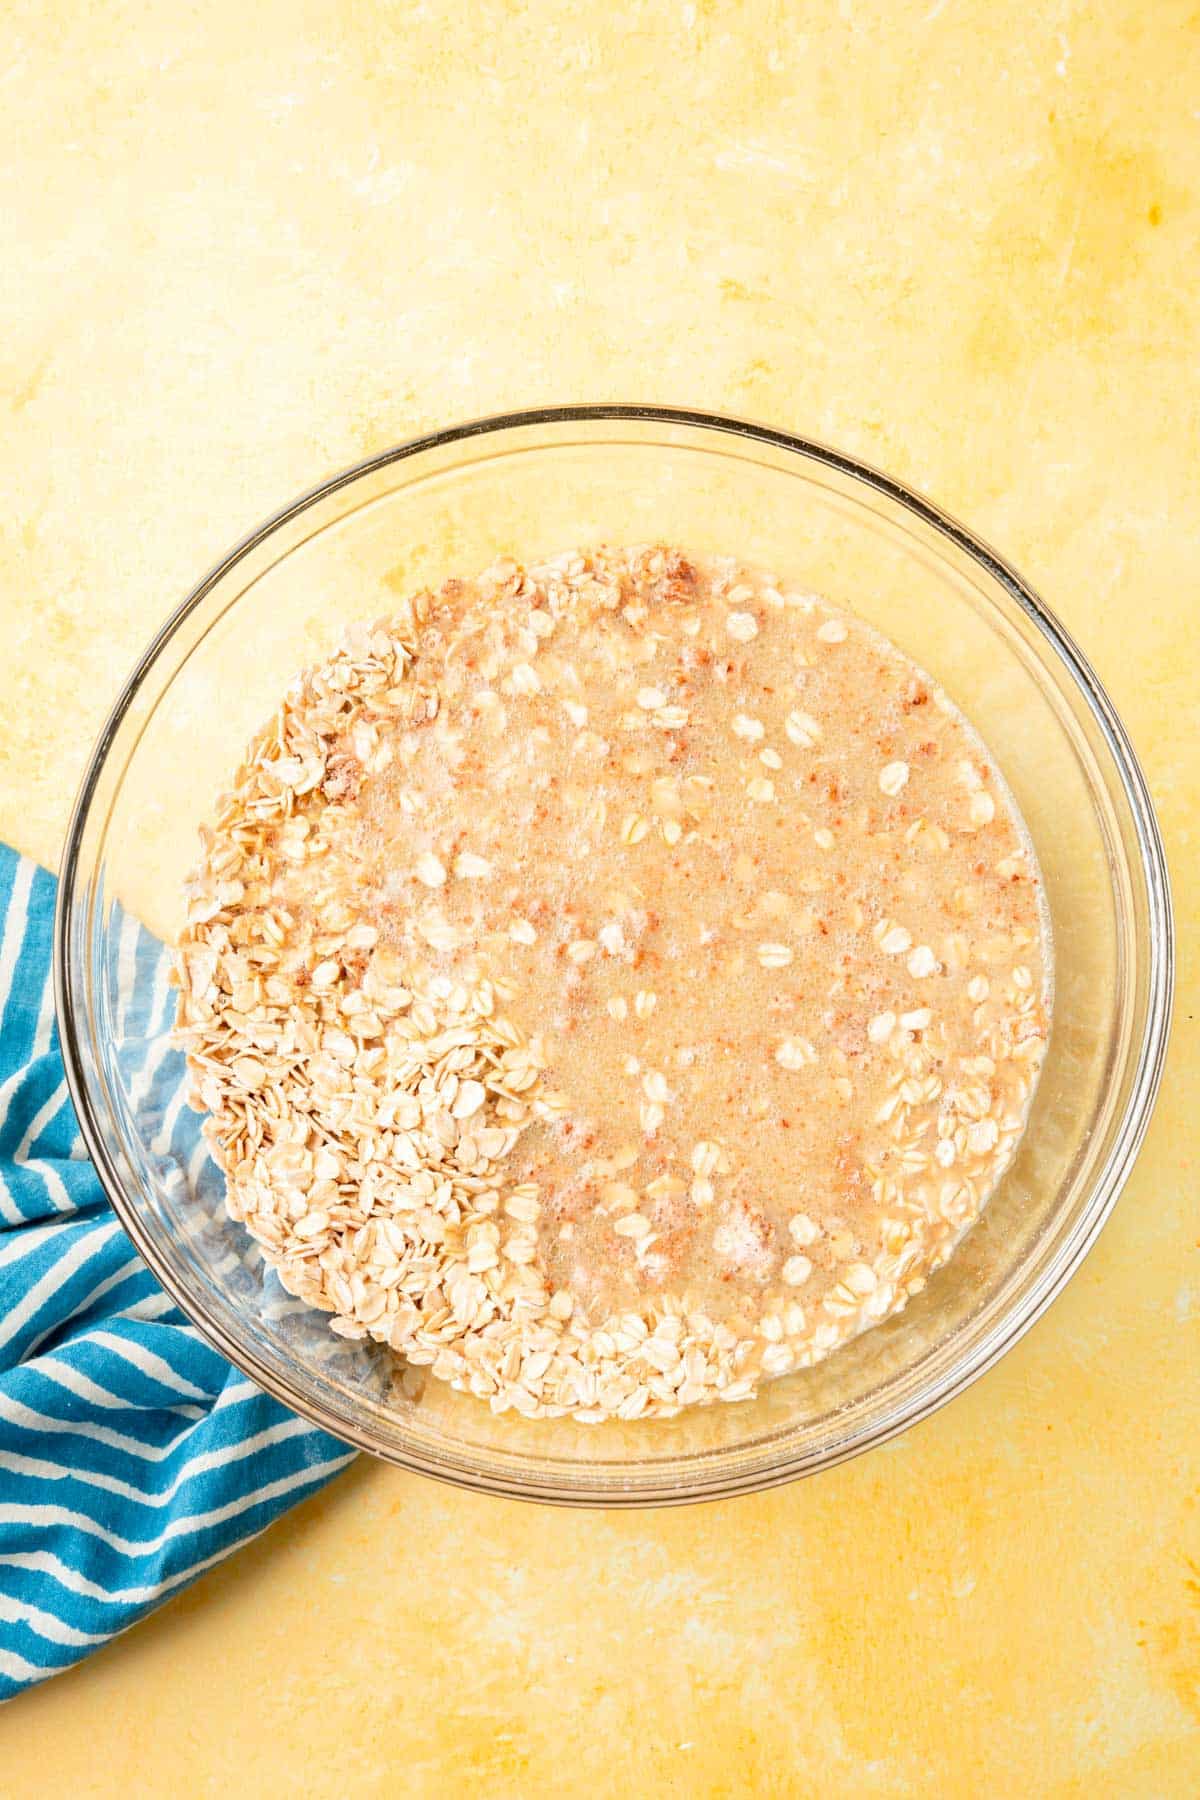 A glass mixing bowl on a yellow table filled with gluten-free oats, cinnamon, and almond milk not yet mixed together.